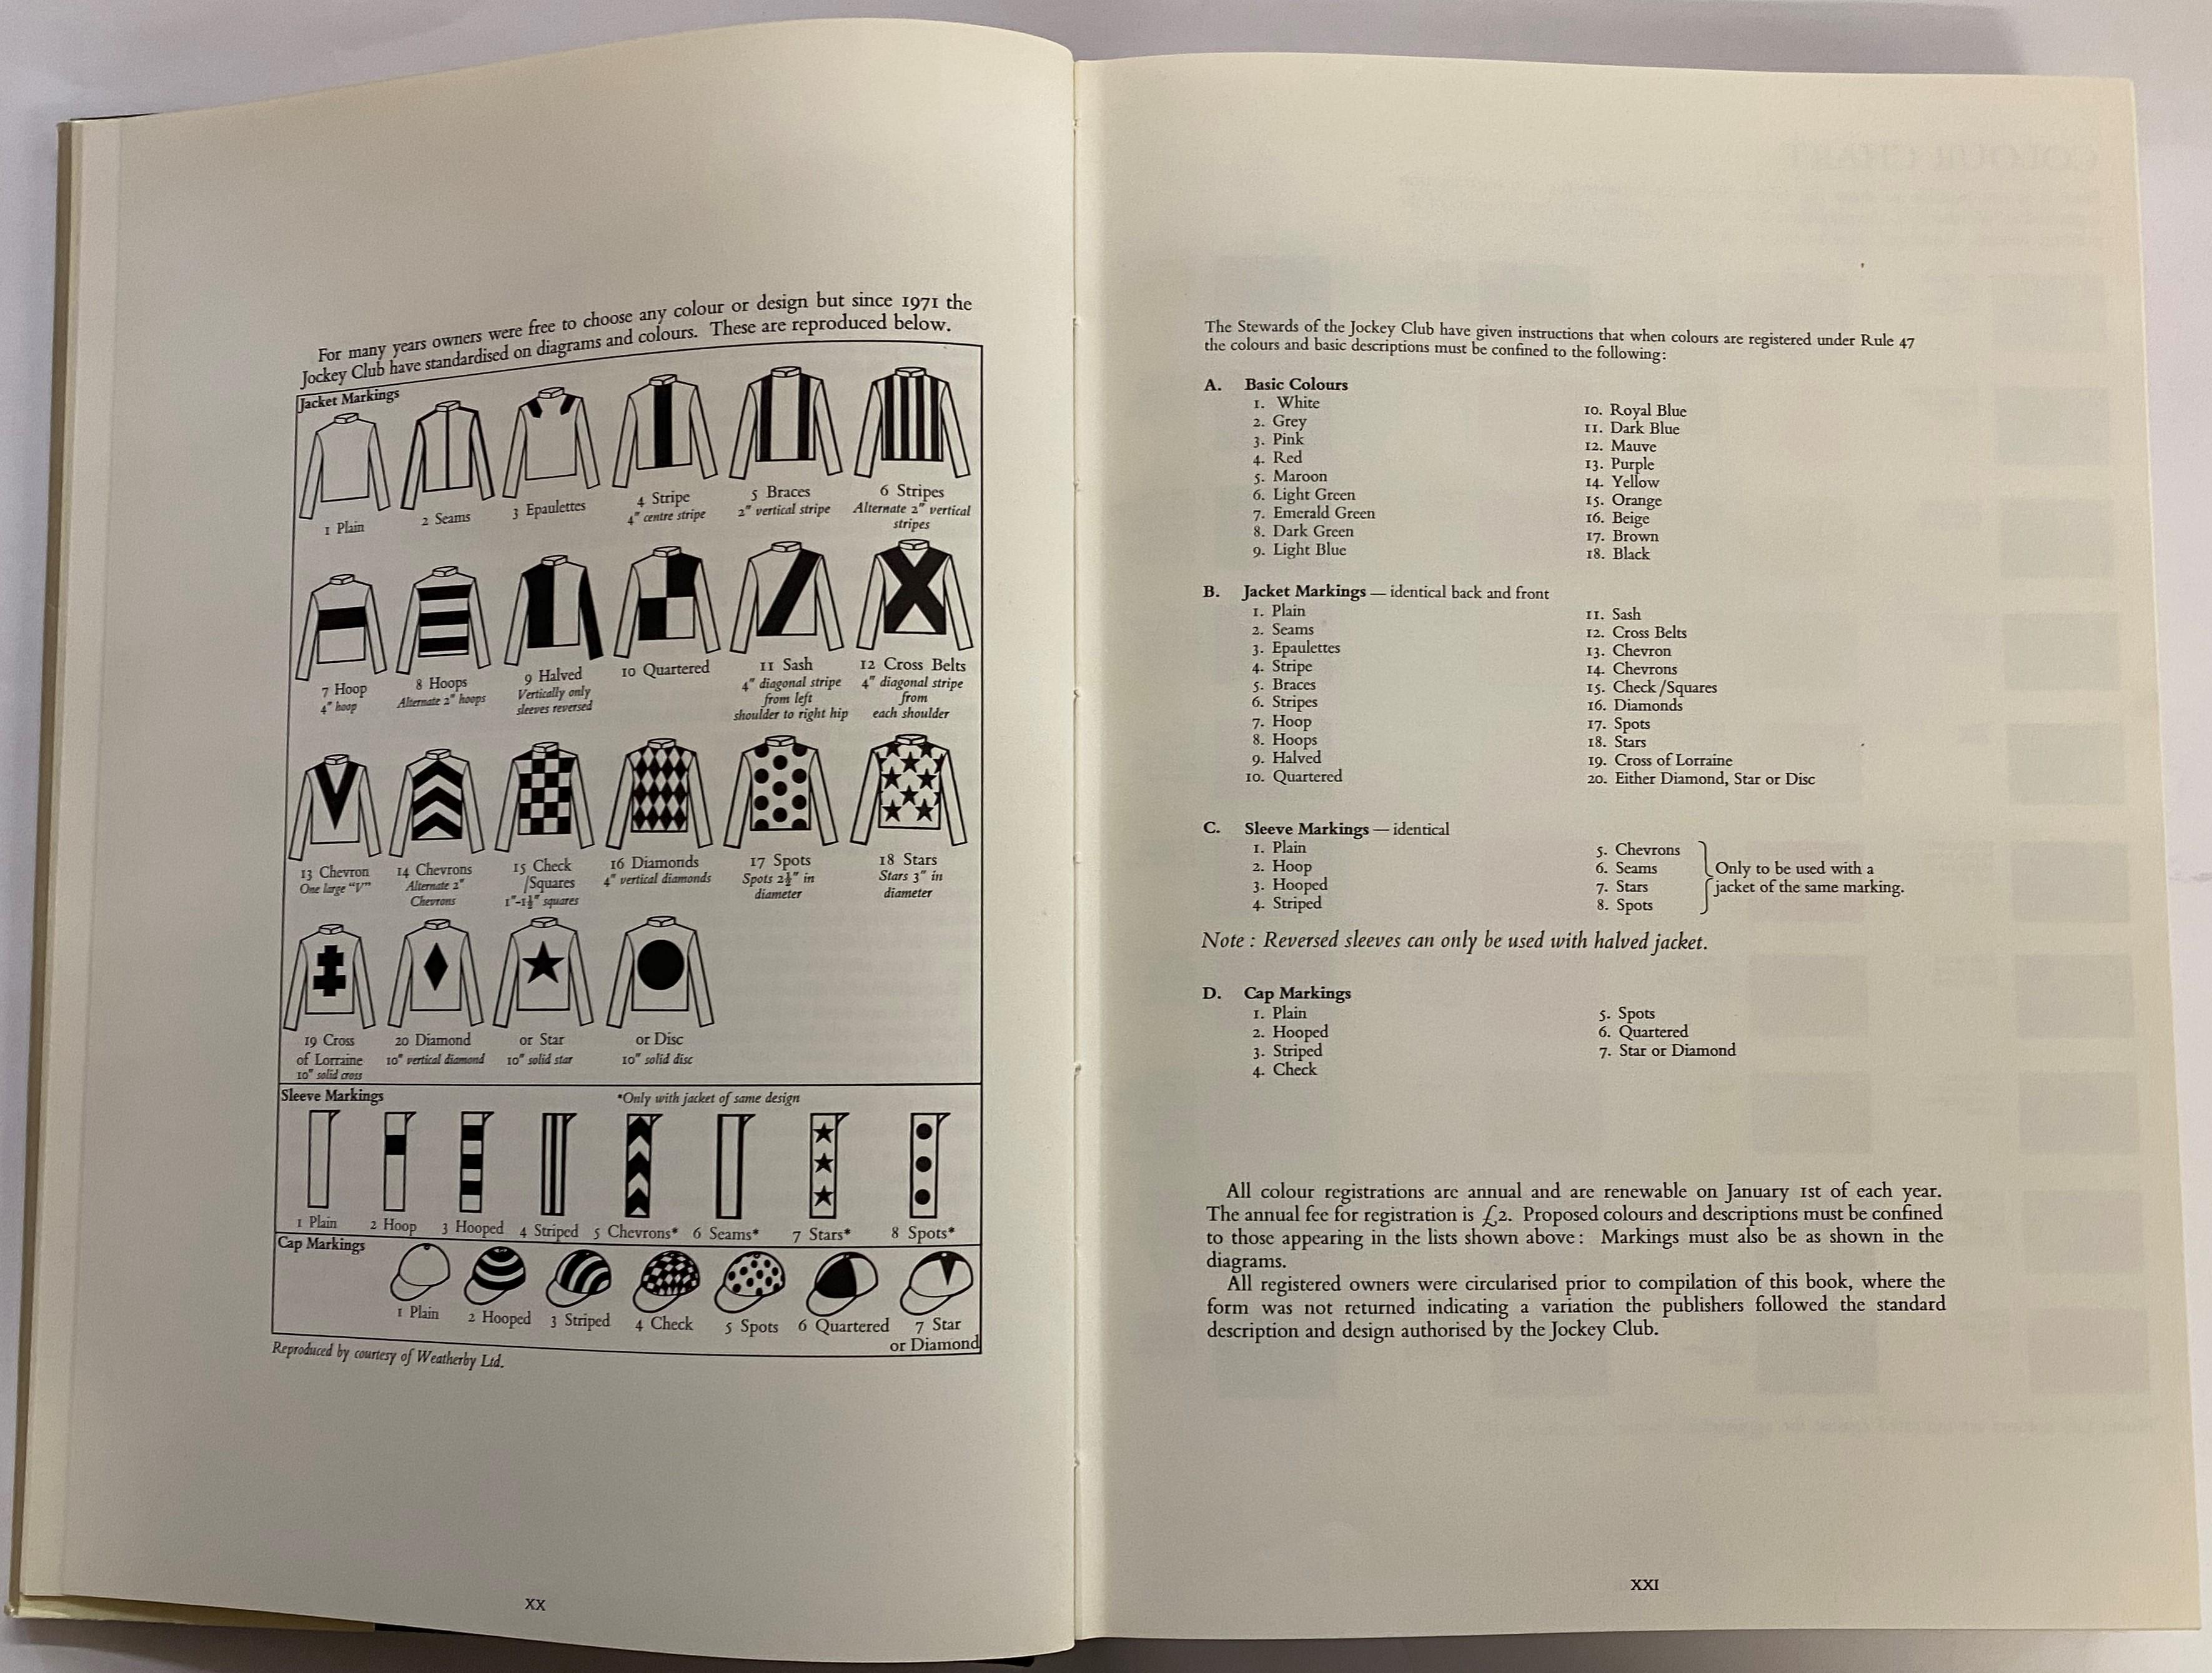 Introduction by Major-General Sir Randle Feilden, K.C.V.O., C.B., C.B.E. (Senior Steward of the Jockey Club)
A pictorial dictionary of racing colours; as much a work of graphic art as a reference book. Each page contains a grid of 30 line drawings